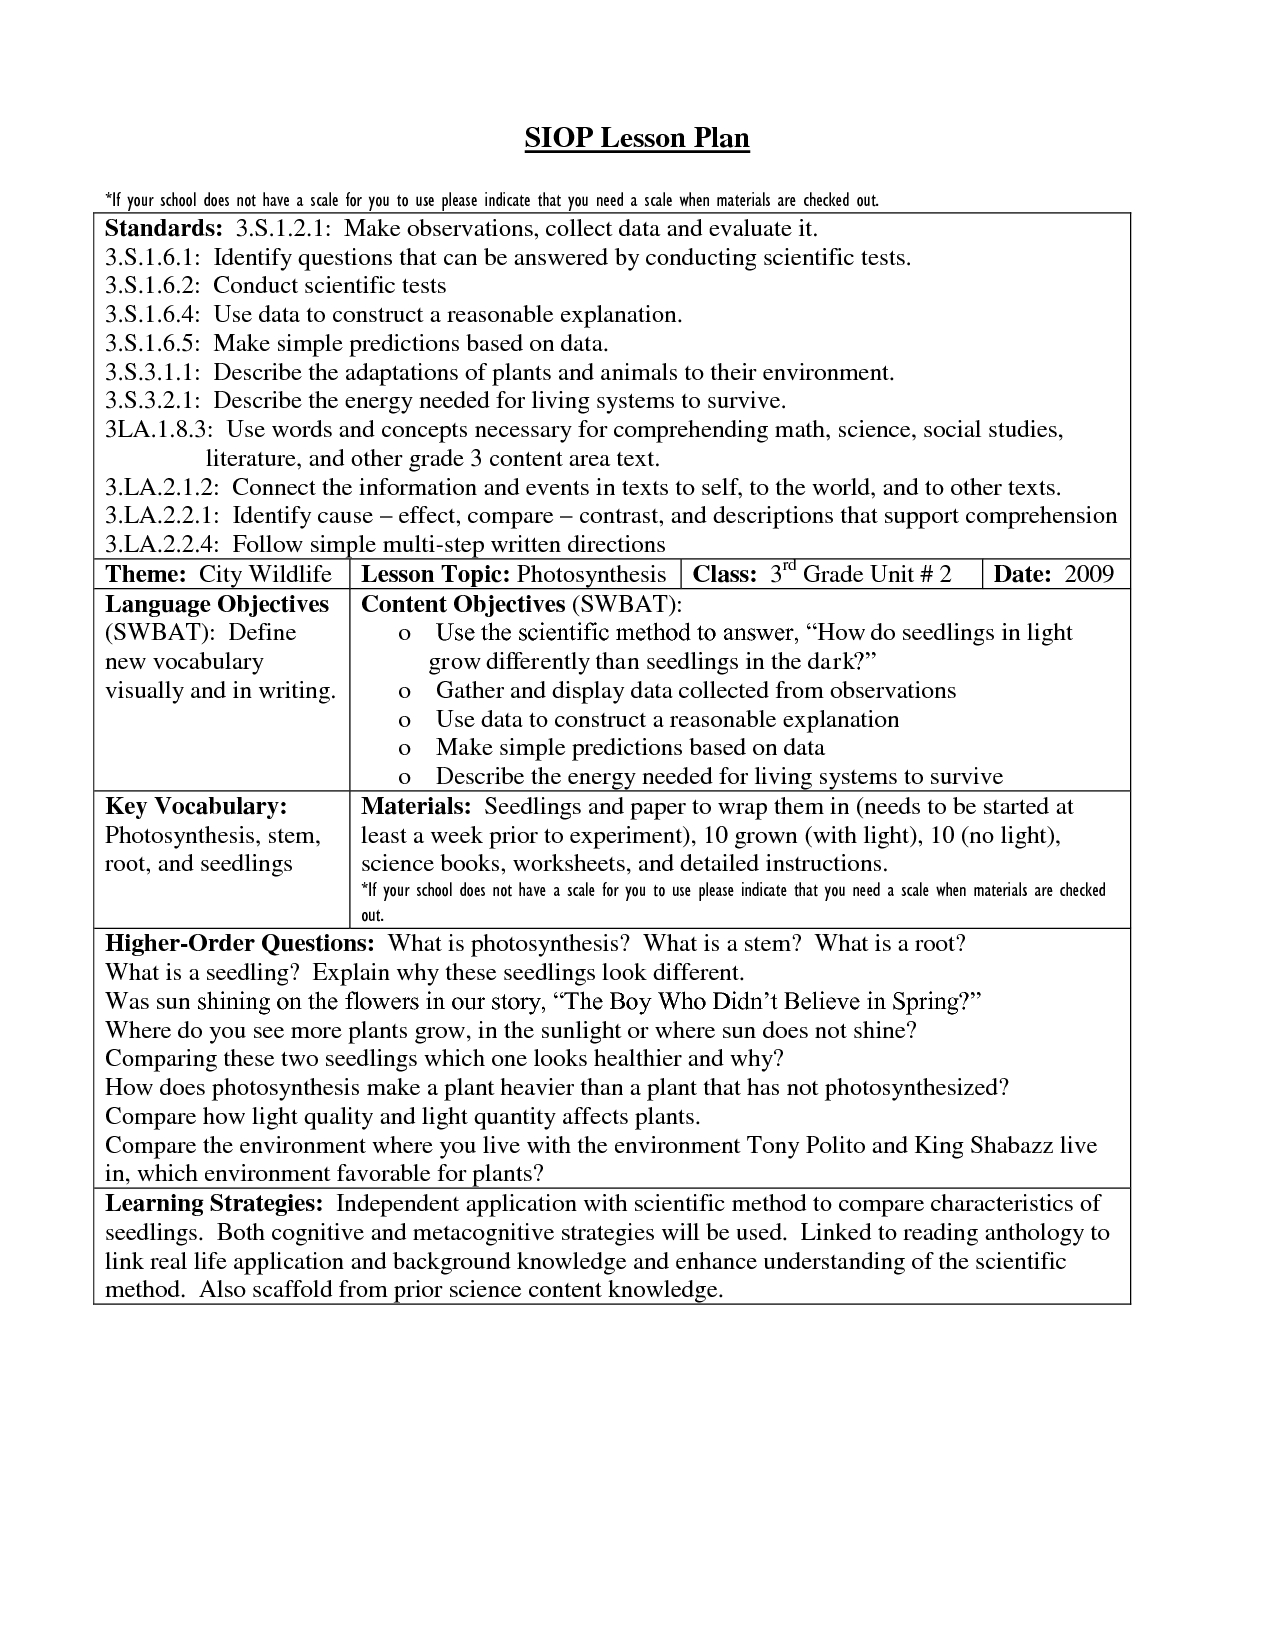 16 Awesome Siop Lesson Plan Template 2 Example | Lesson Plan